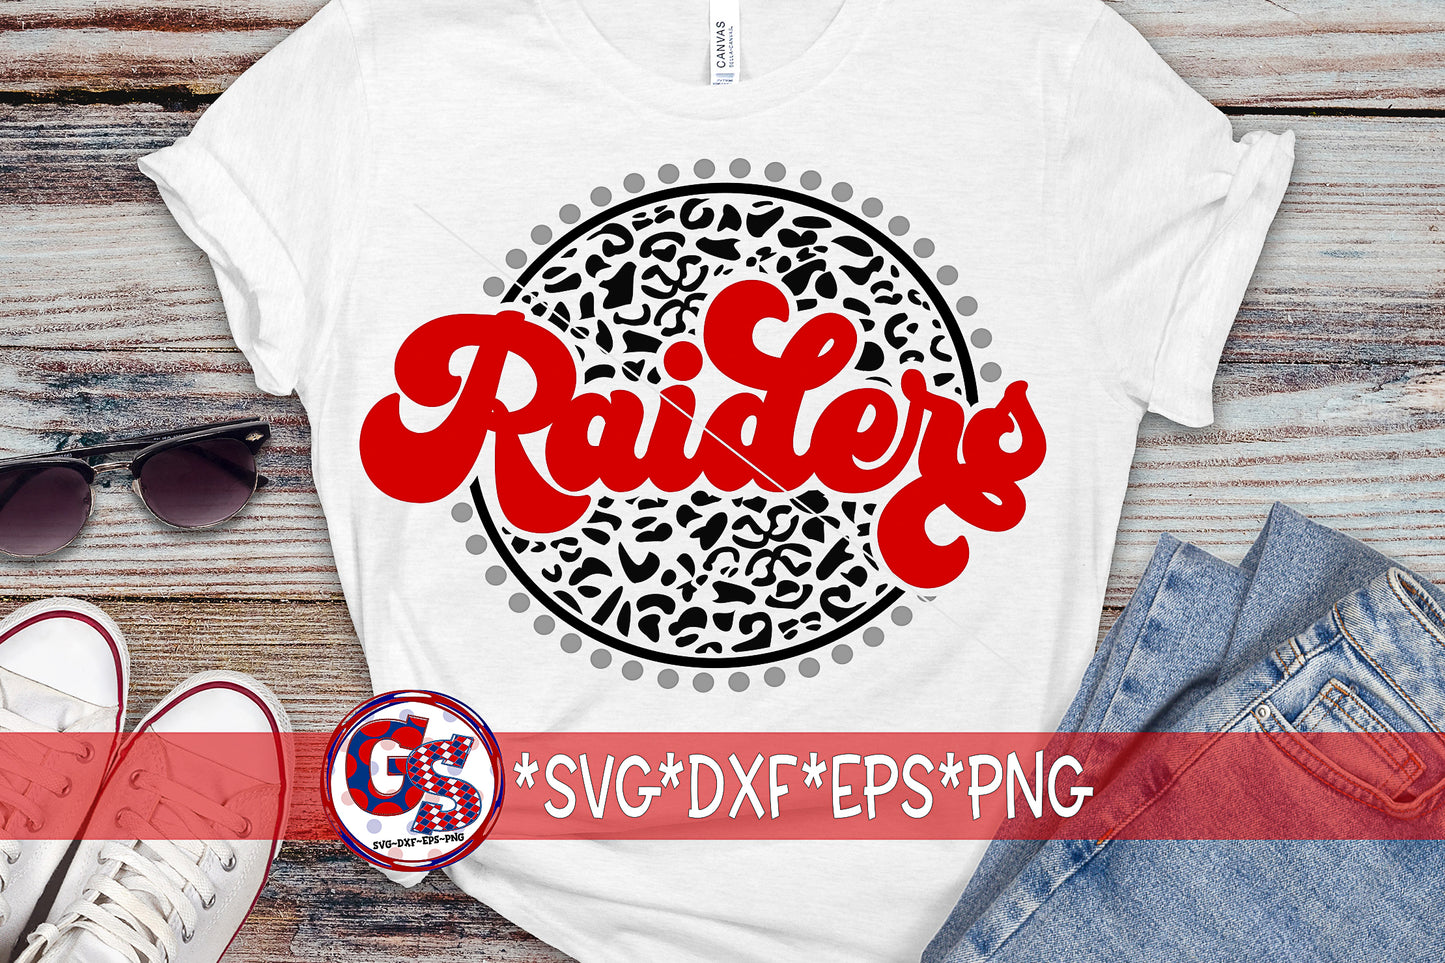 Raiders Medallion SVG DXF EPS PNG